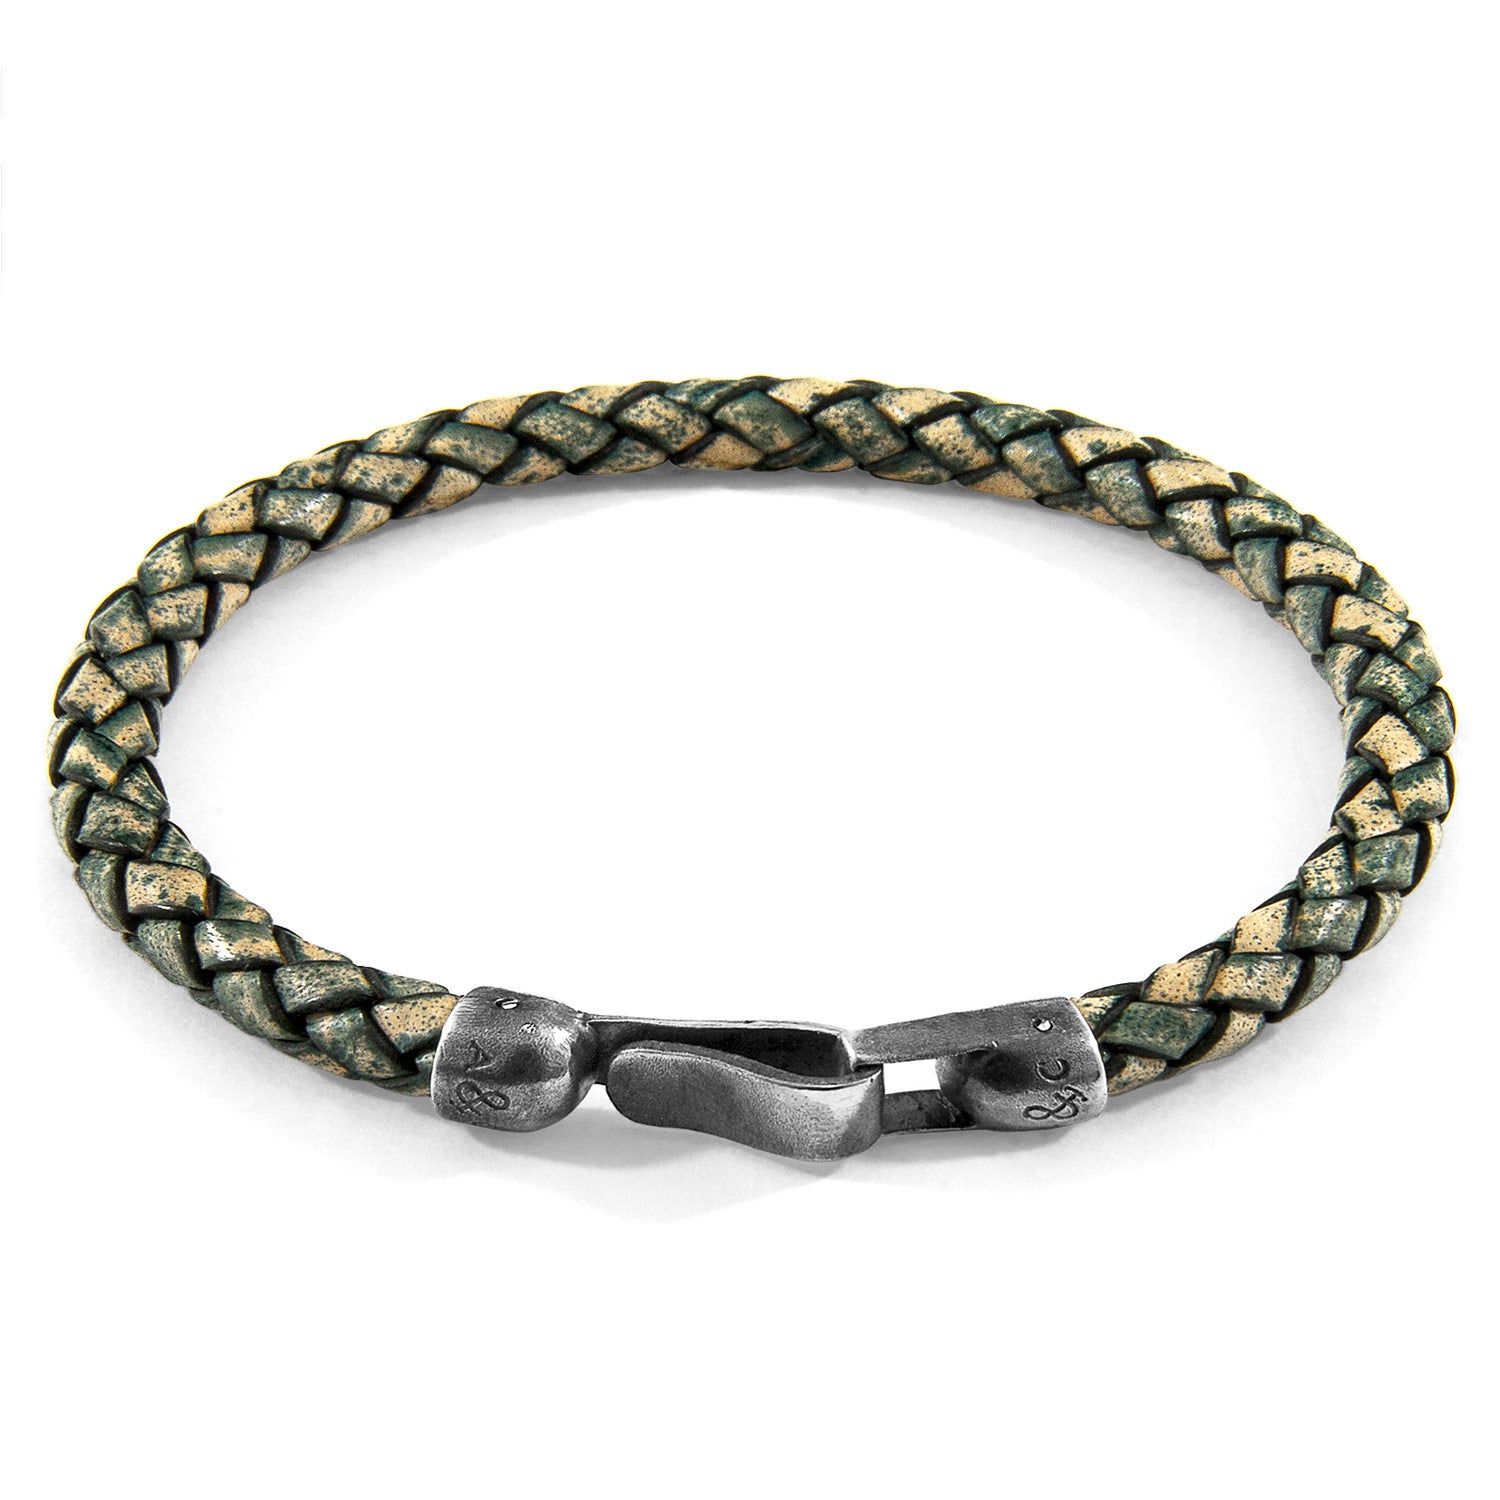 Petrol Green Skye Silver and Braided Leather Bracelet: Handcrafted in Great Britain with Sterling Silver Clasp - Jewelry & Watches - Bijou Her -  -  - 